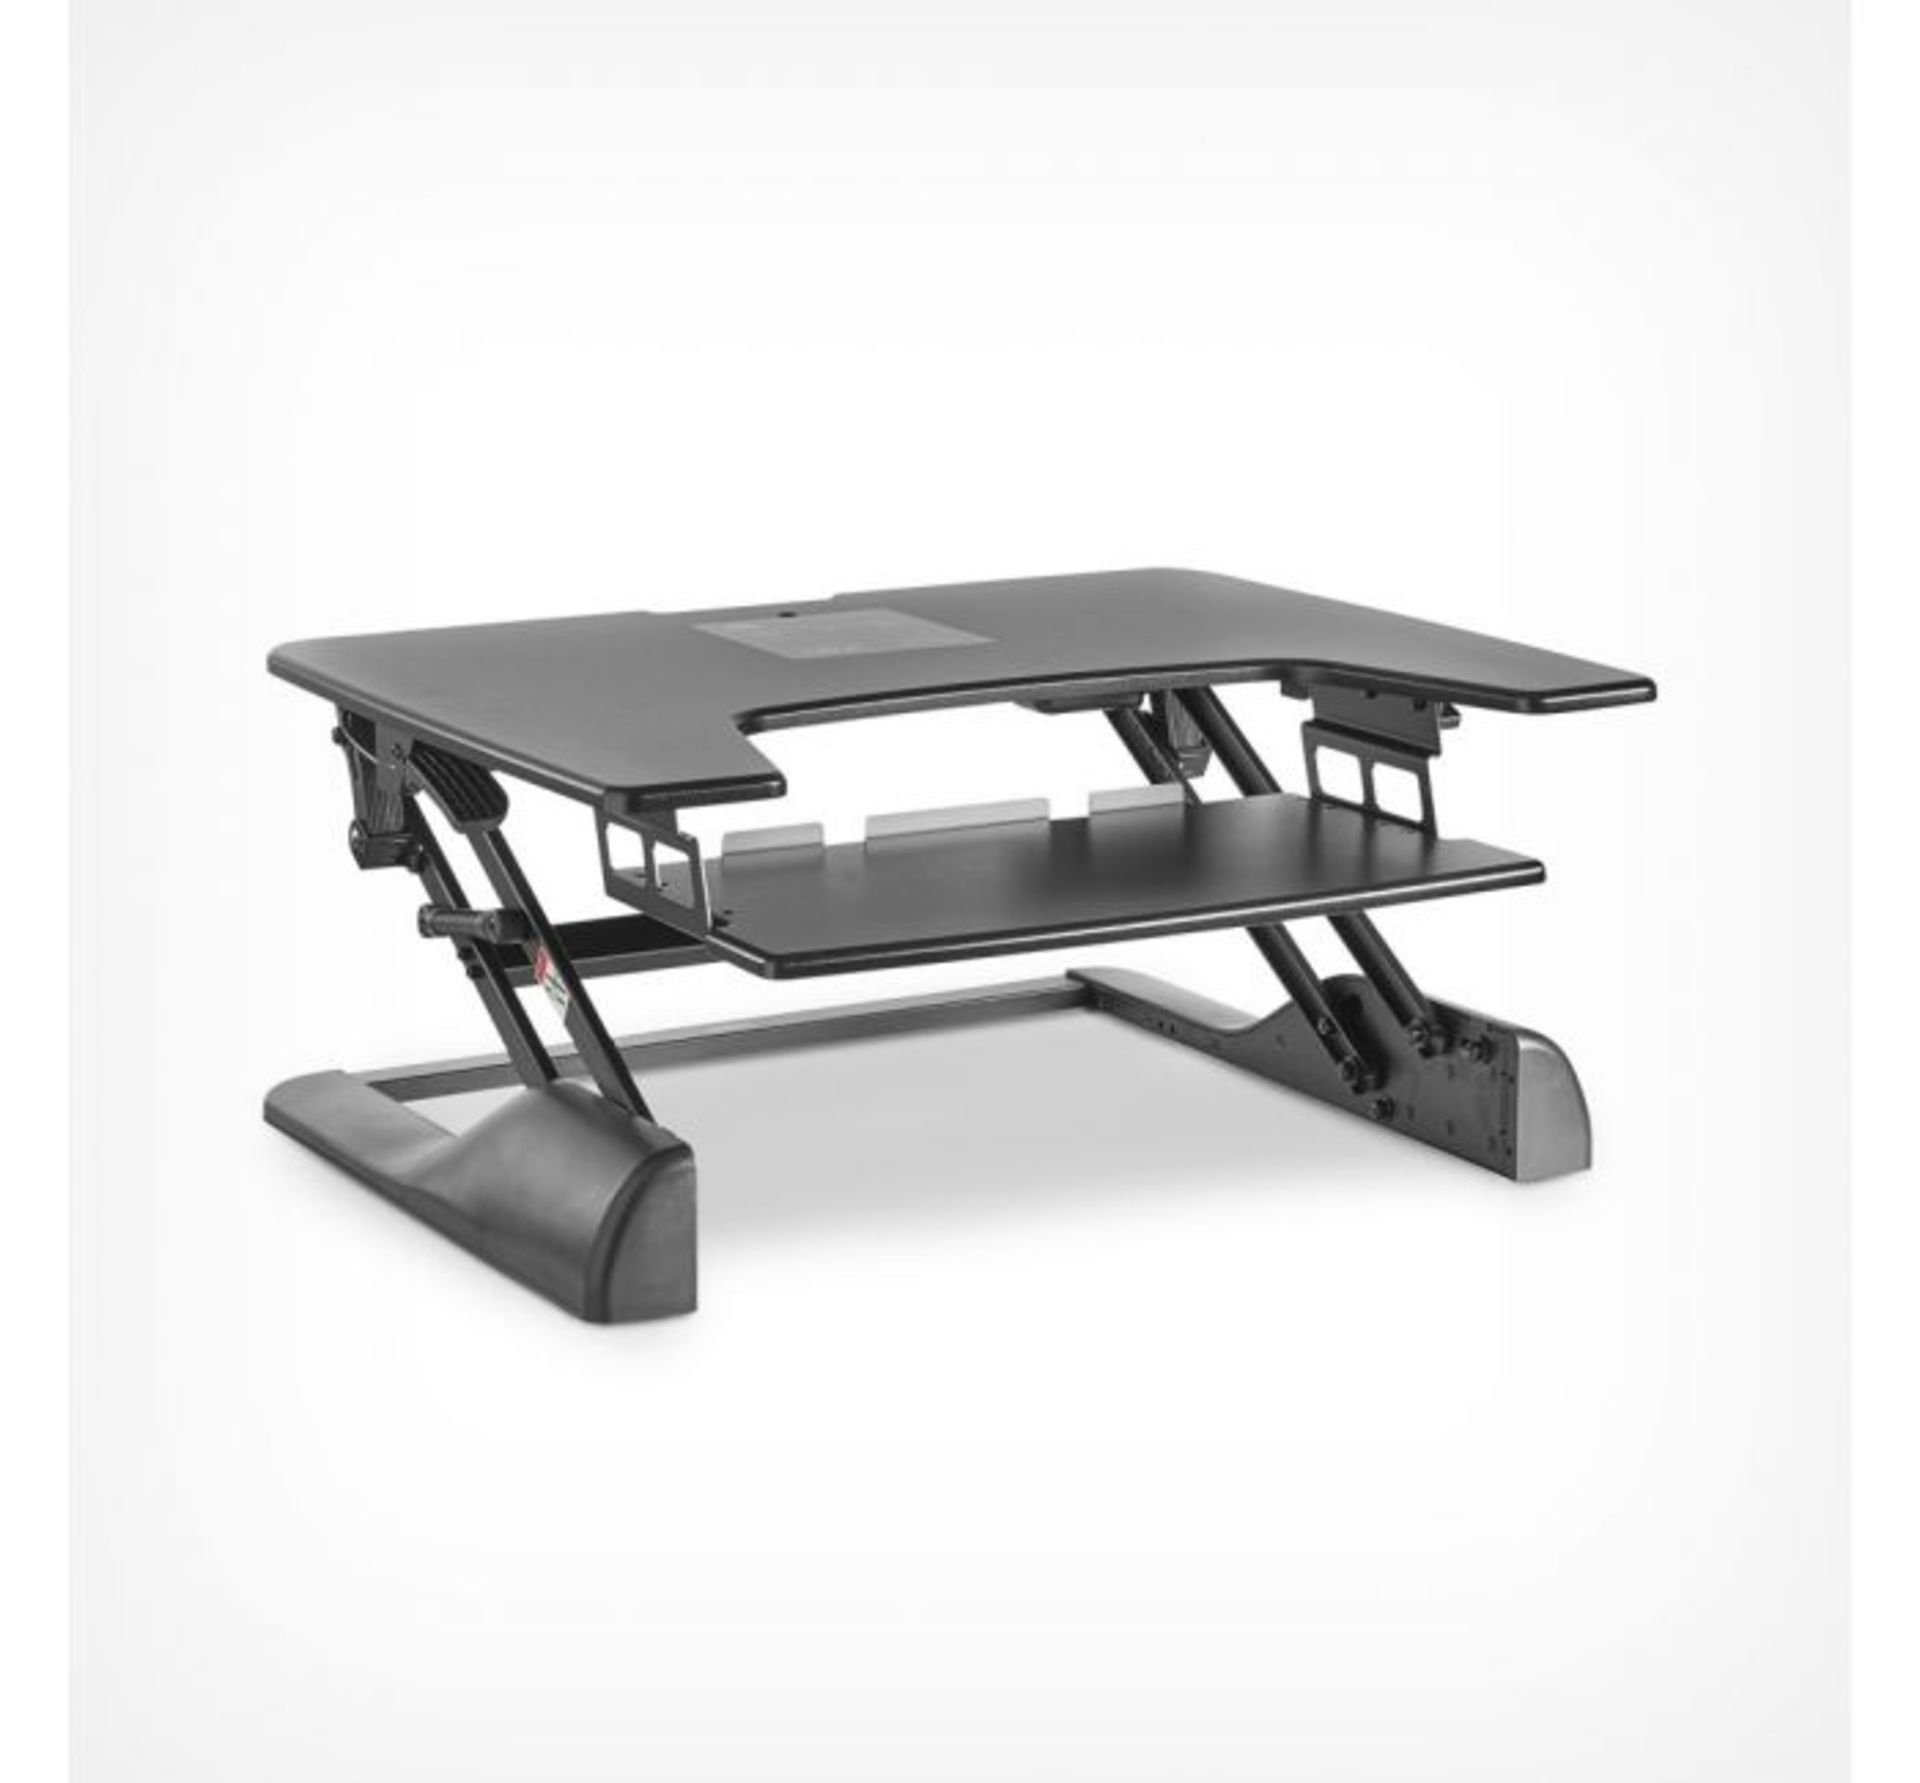 (D17) Black Sitting & Standing Desk Ergonomic tiered sit to stand workstation - allows you to ... - Image 2 of 3